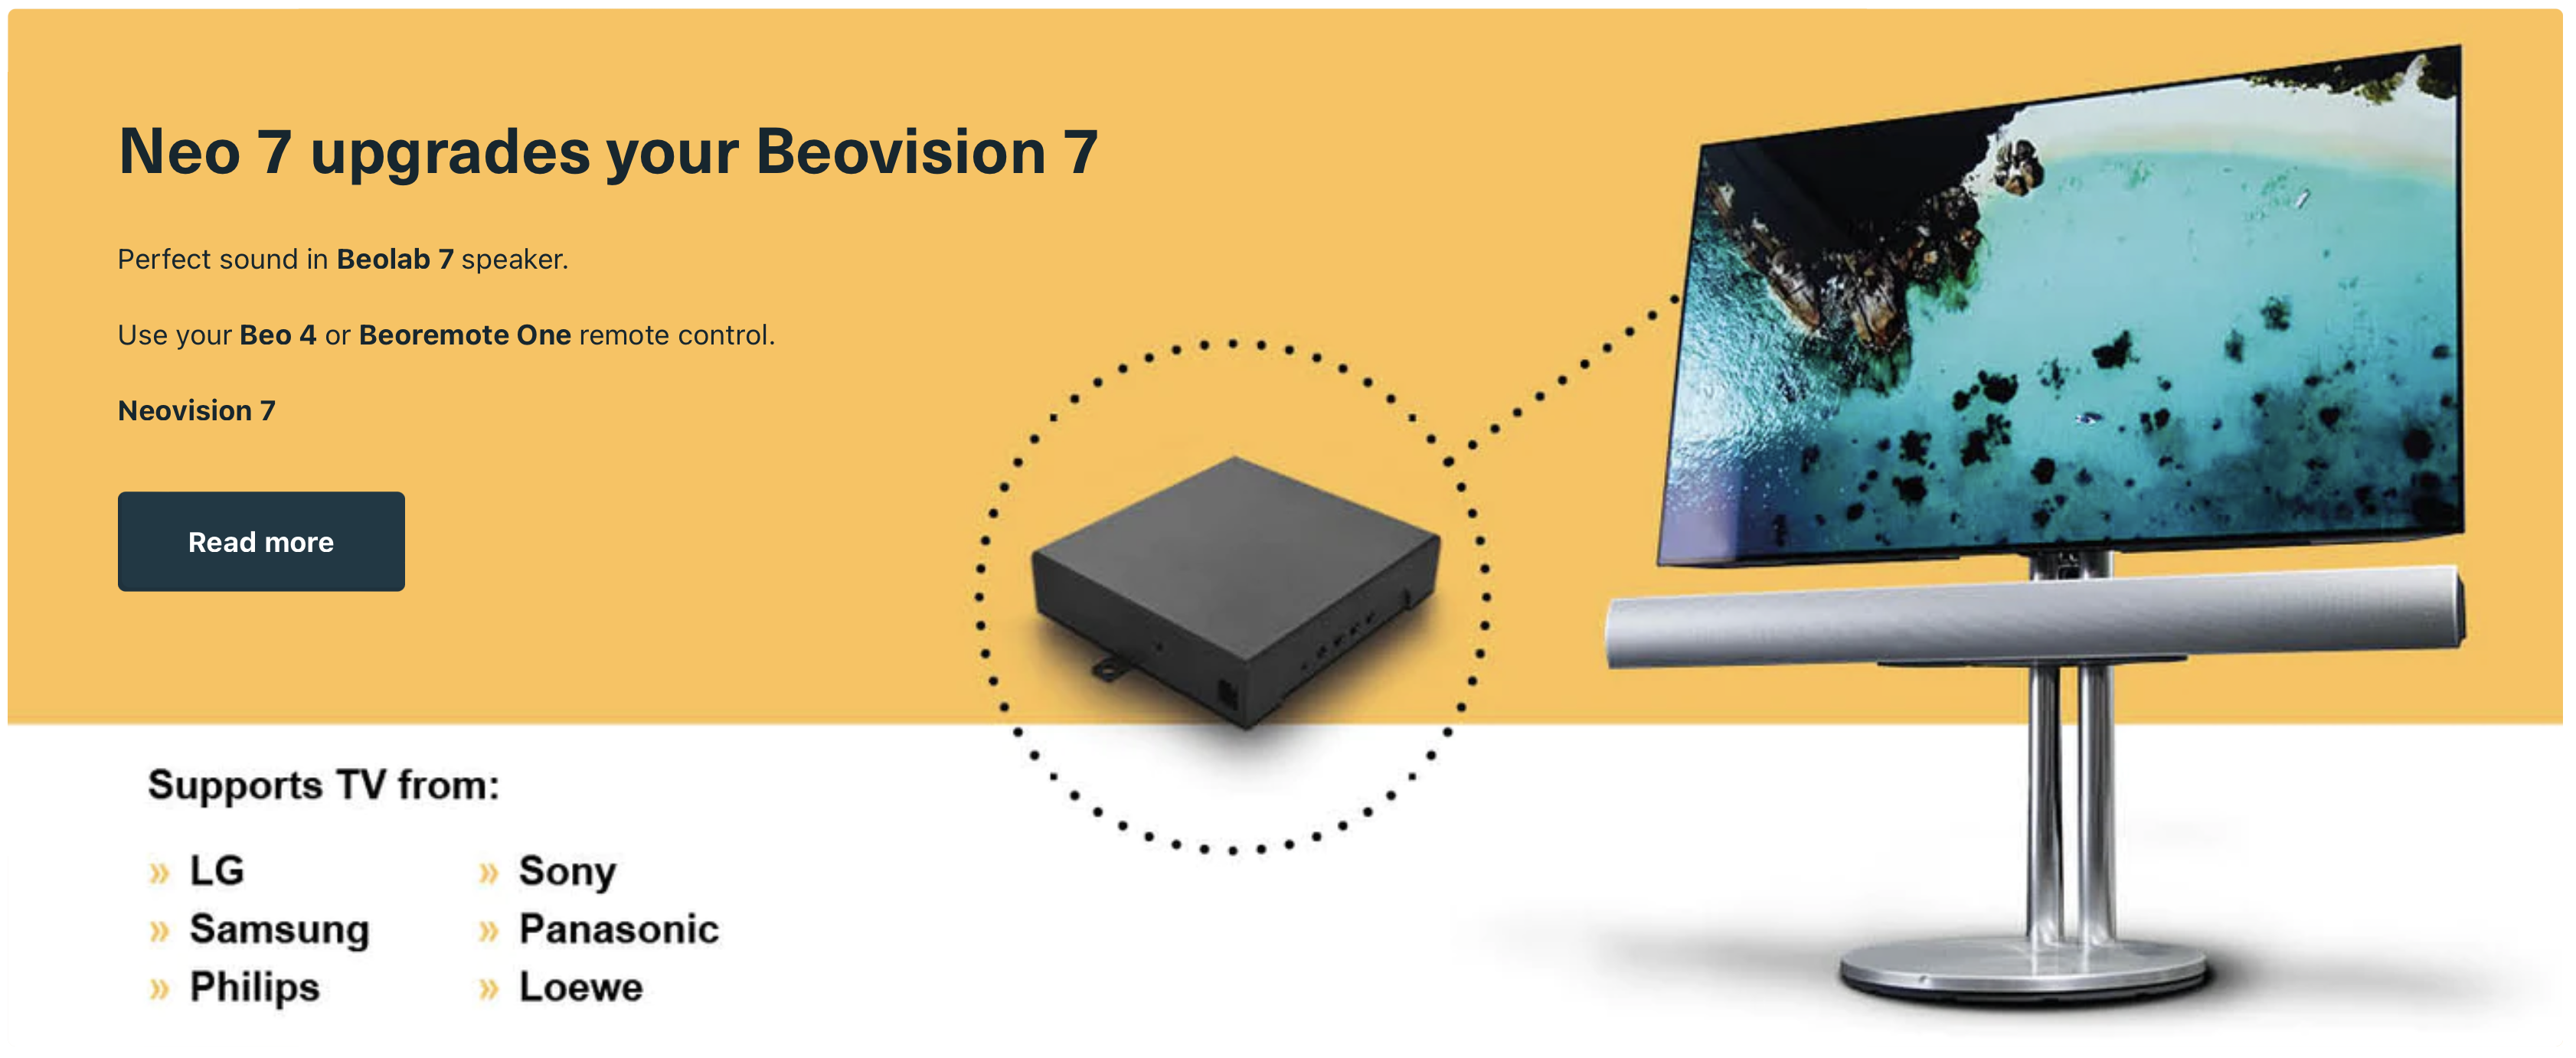 Neo 7 Adapter updates Beovision 7 to Neovision 7 with Neo Technology